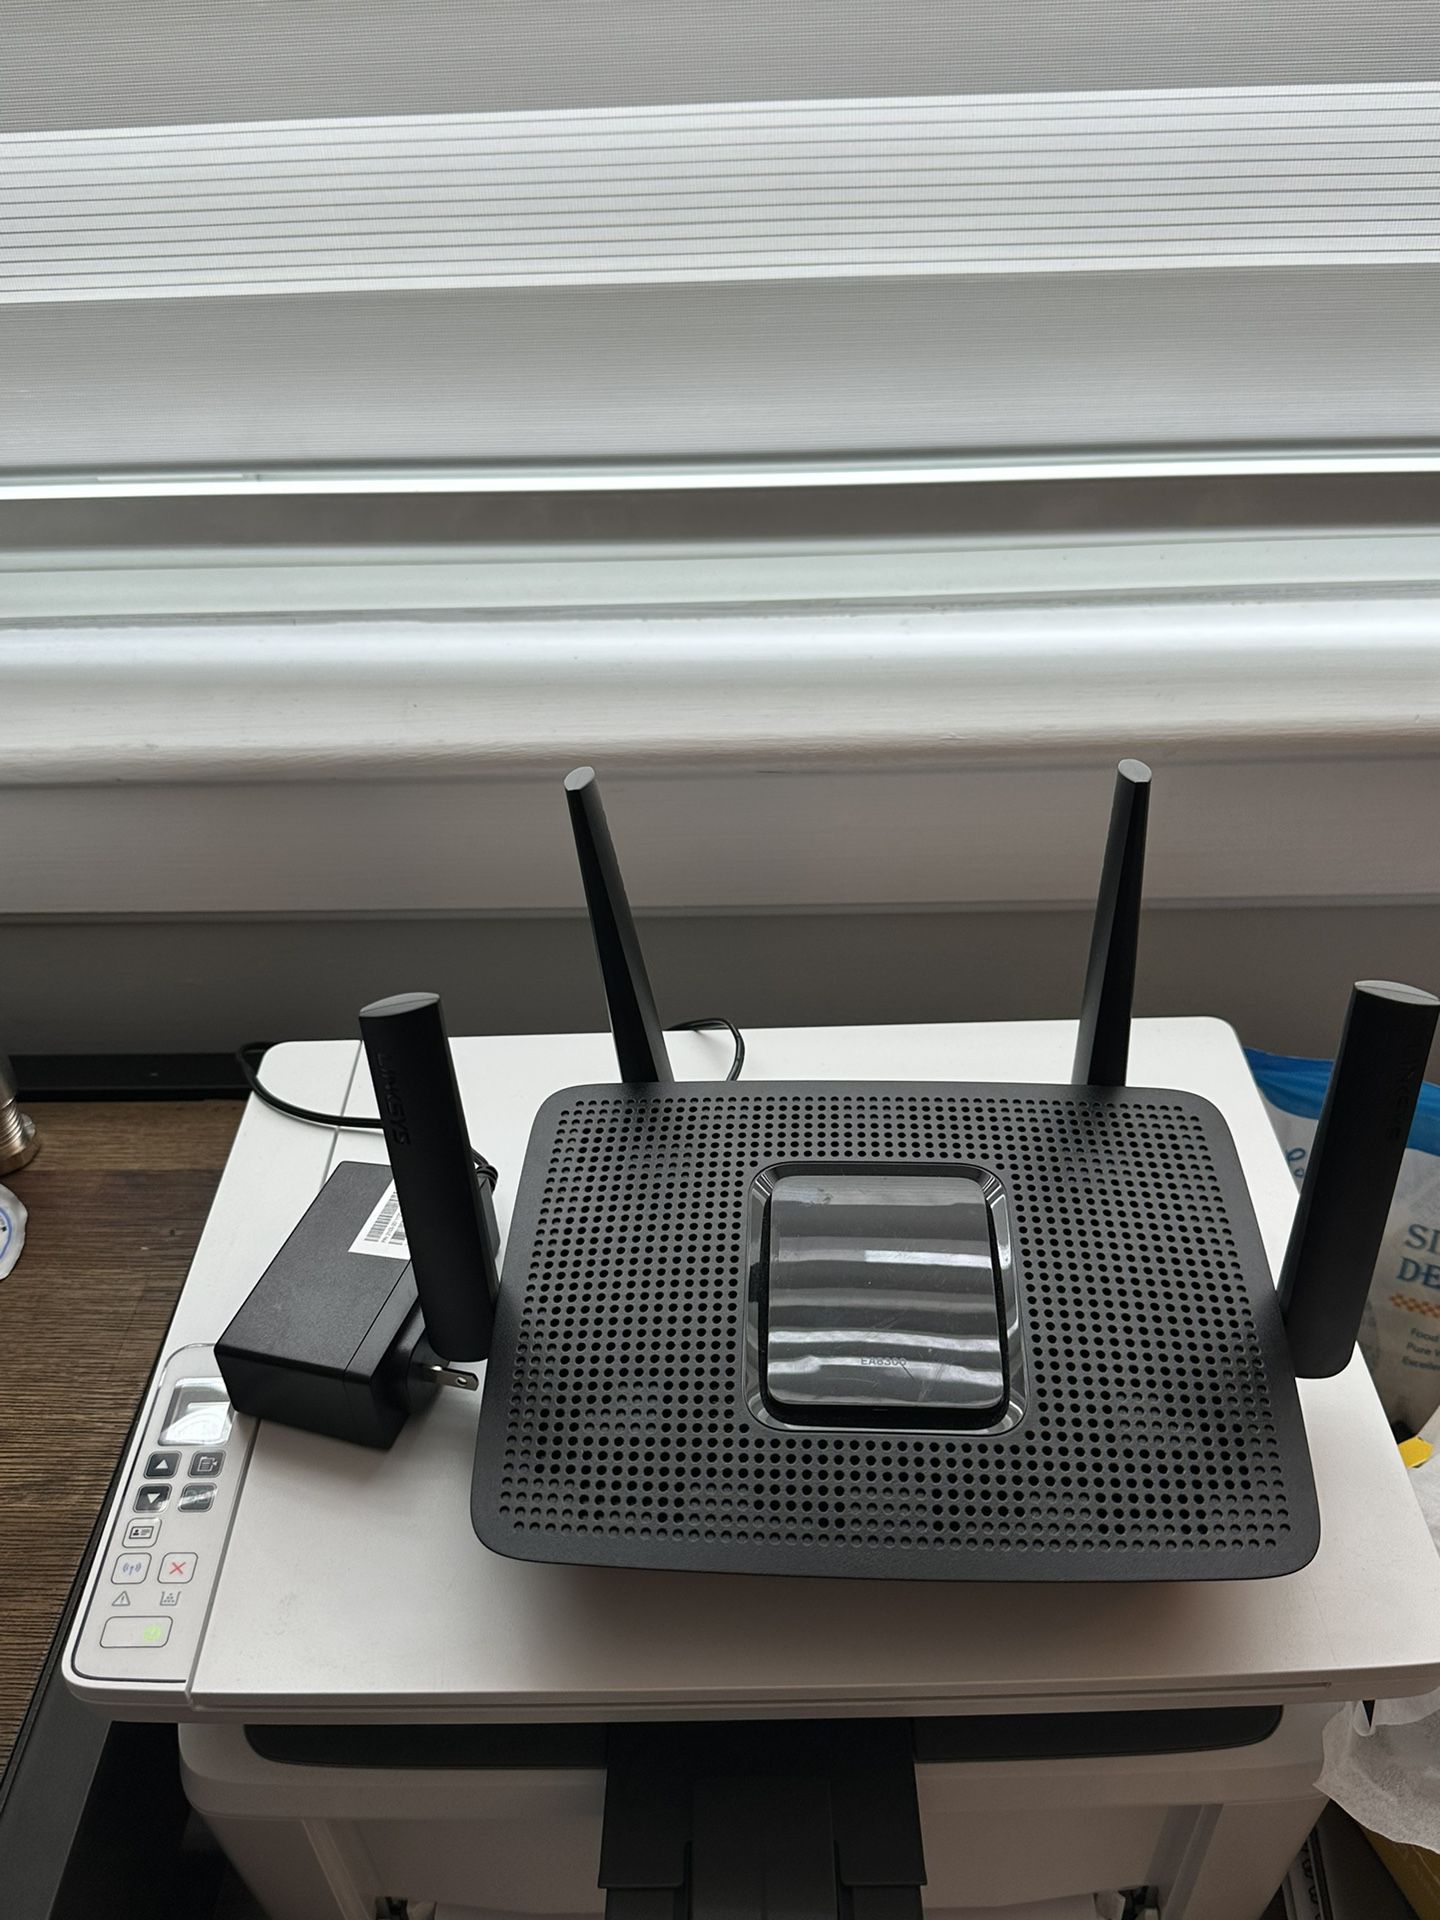 Linksys Tri-band WiFi Router 